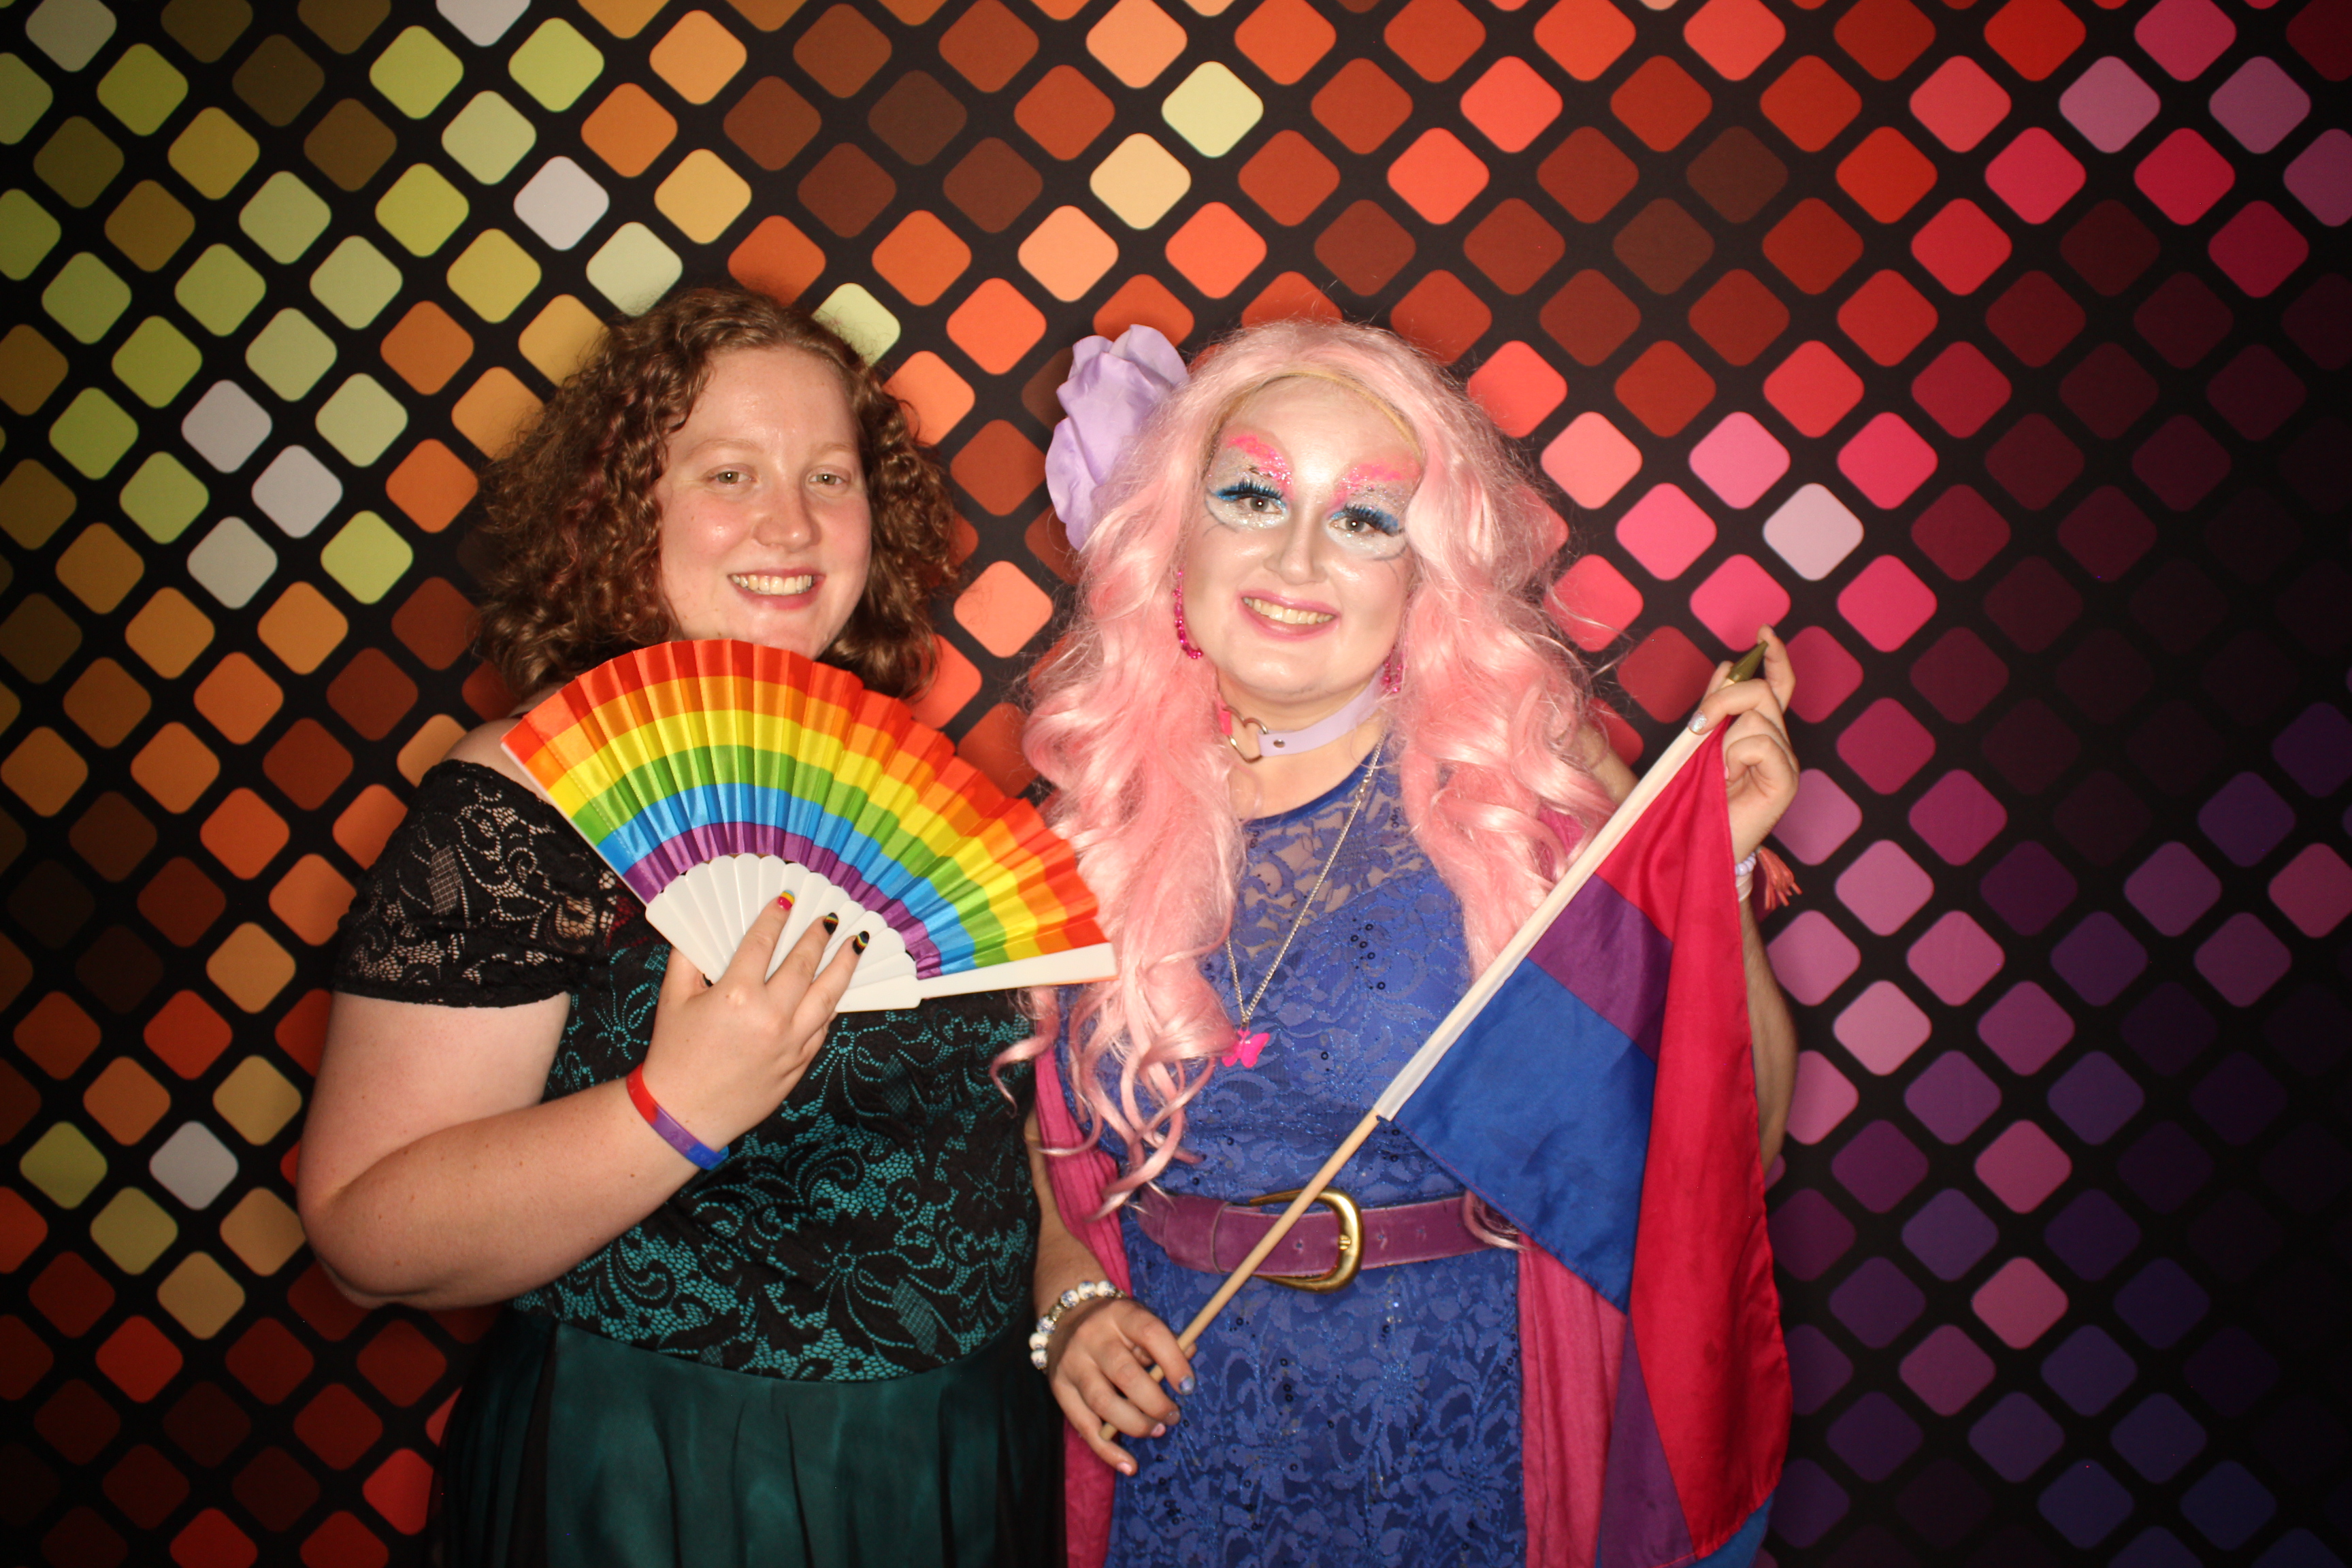 Katherine Hansford and Claire Sanderson (also known as Dia Thundara) from the Cardinia Pride advocacy group helped organise this year’s Pride Formal with support from Council’s Youth Services Team.